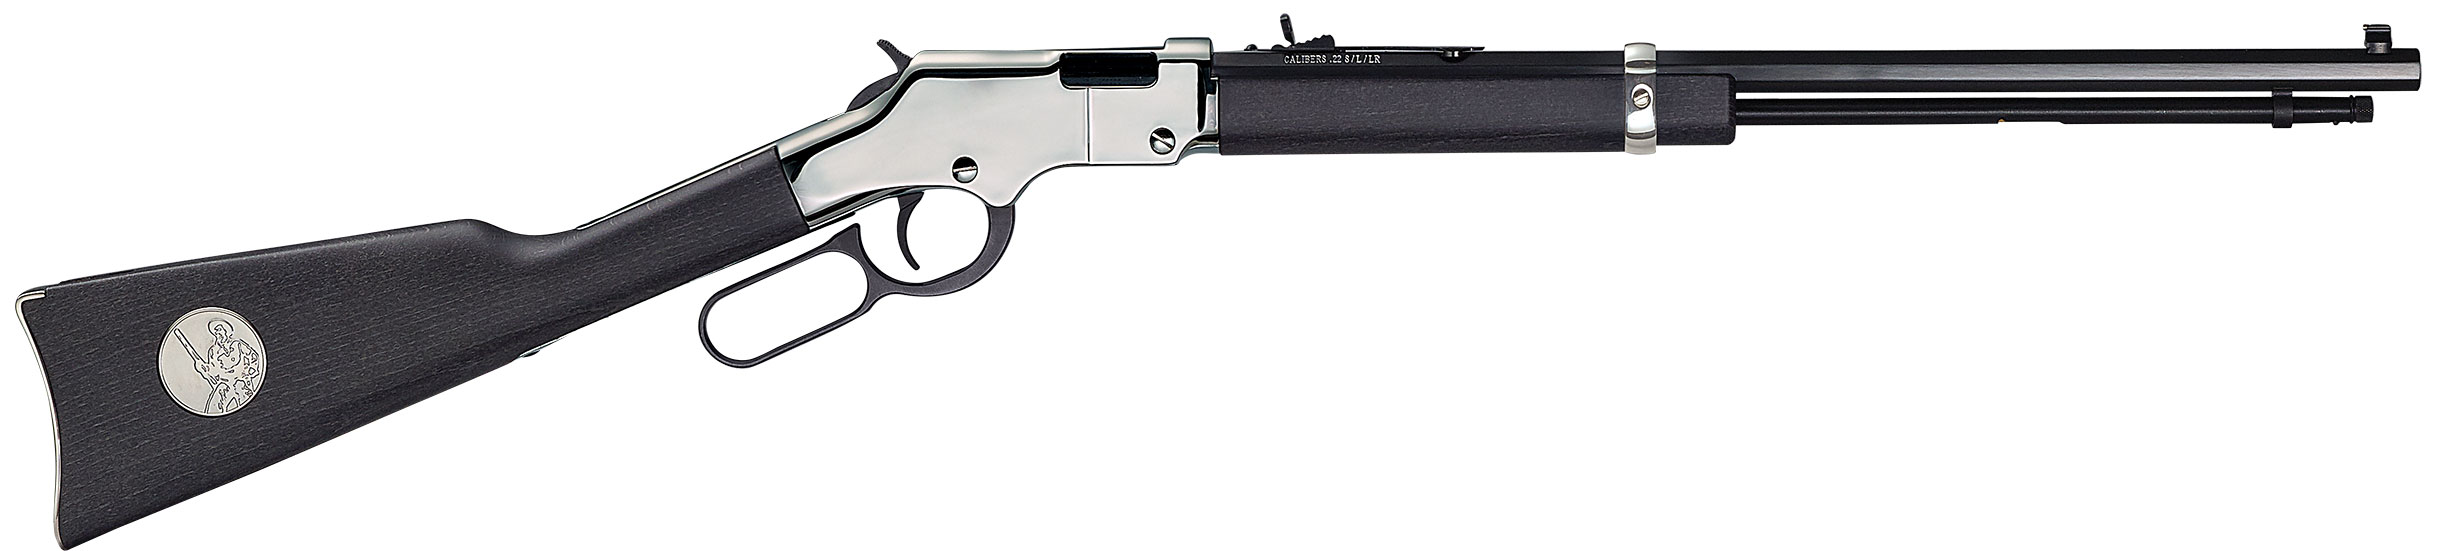 Henry Announces the Silver Anniversary Limited-Edition Rifle